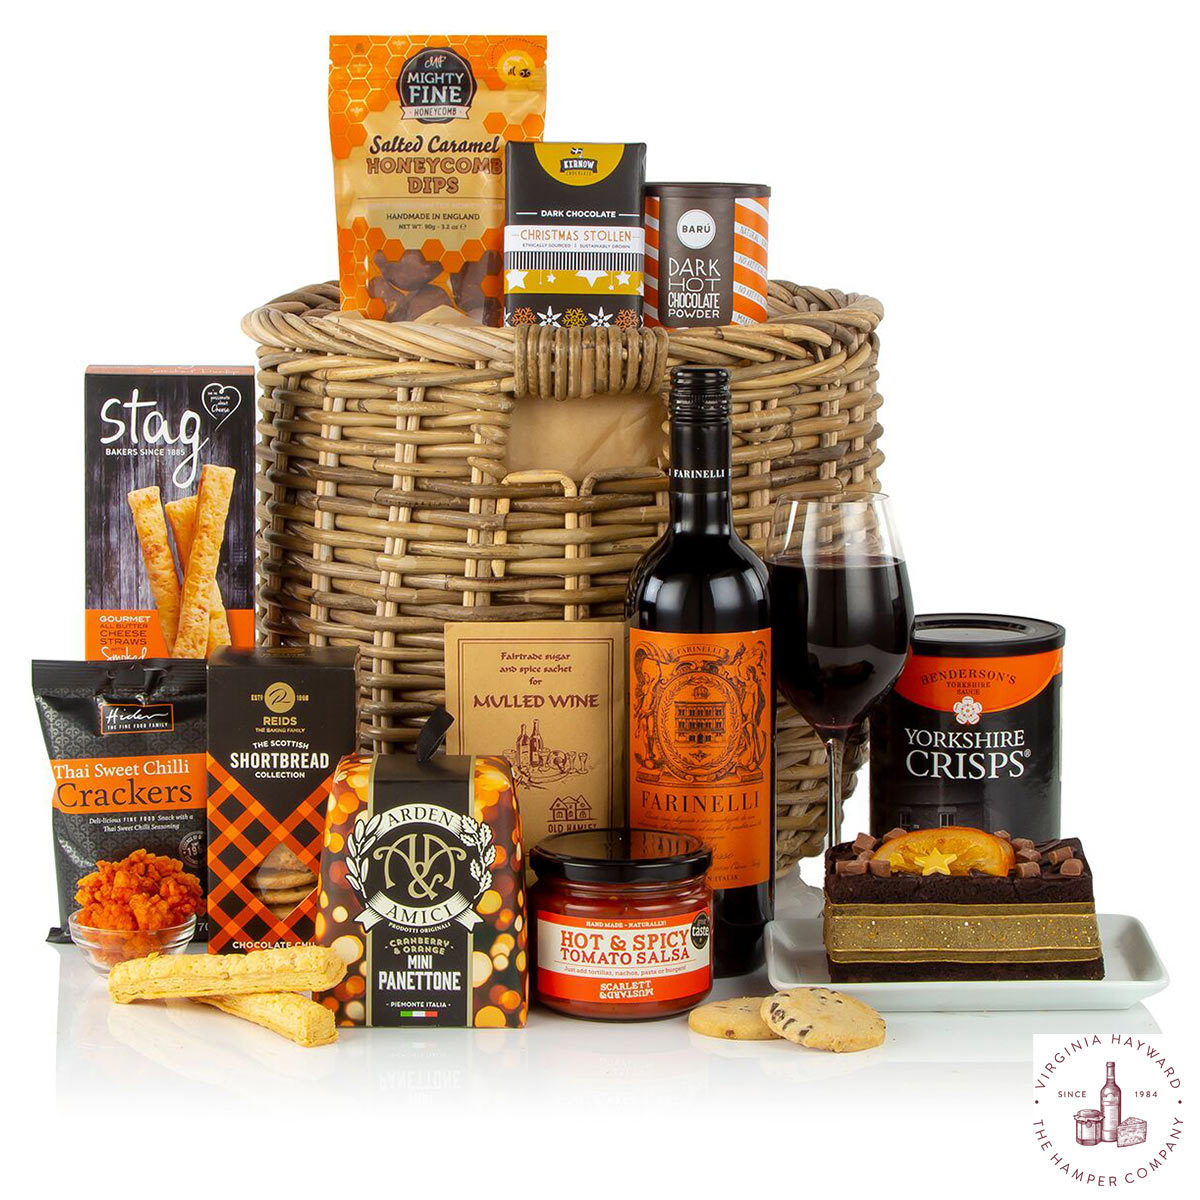 Image showcasing the items included in the Fireside Feast hamper